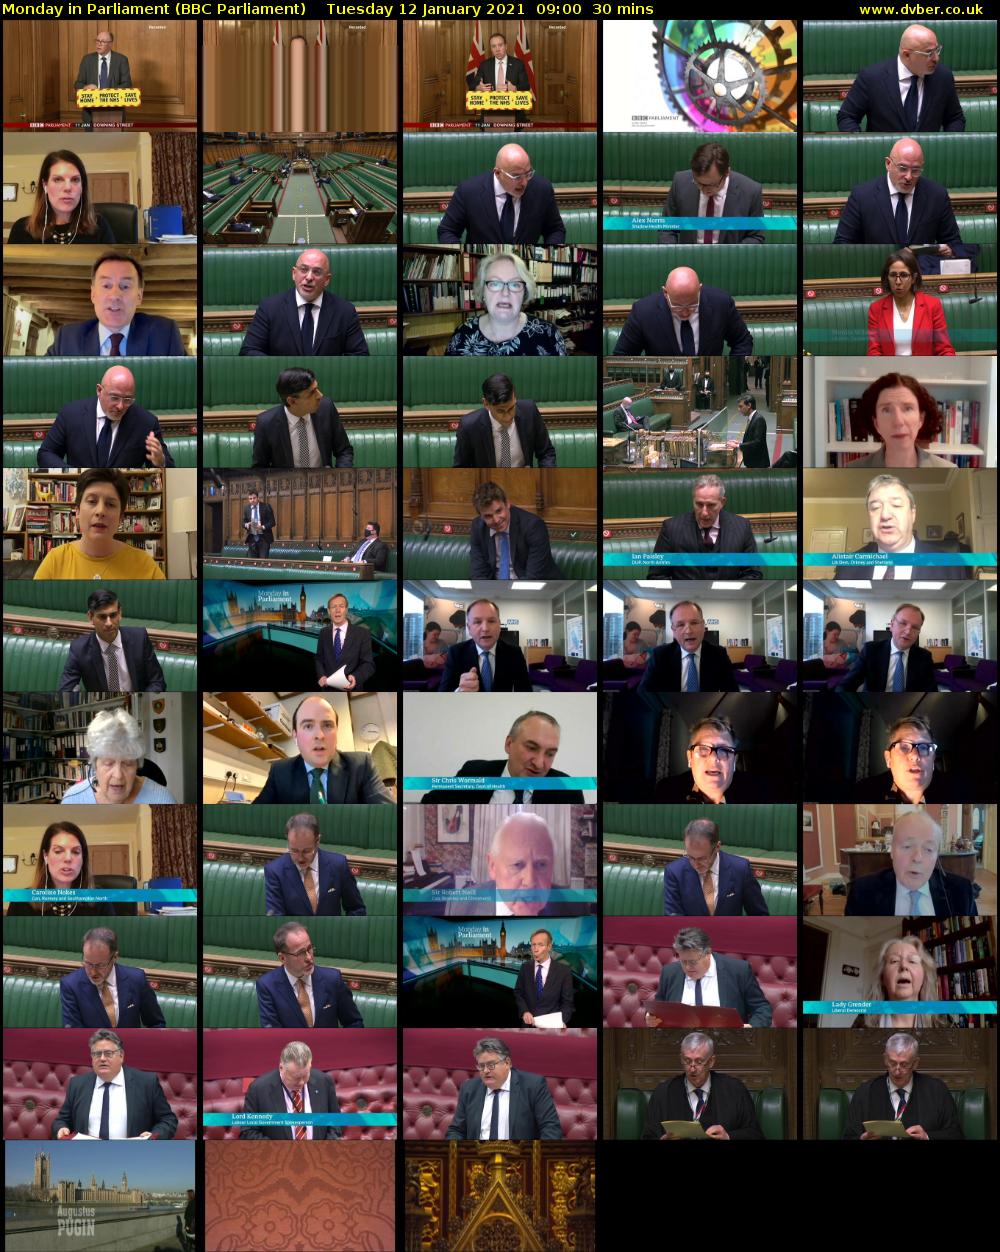 Monday in Parliament (BBC Parliament) Tuesday 12 January 2021 09:00 - 09:30